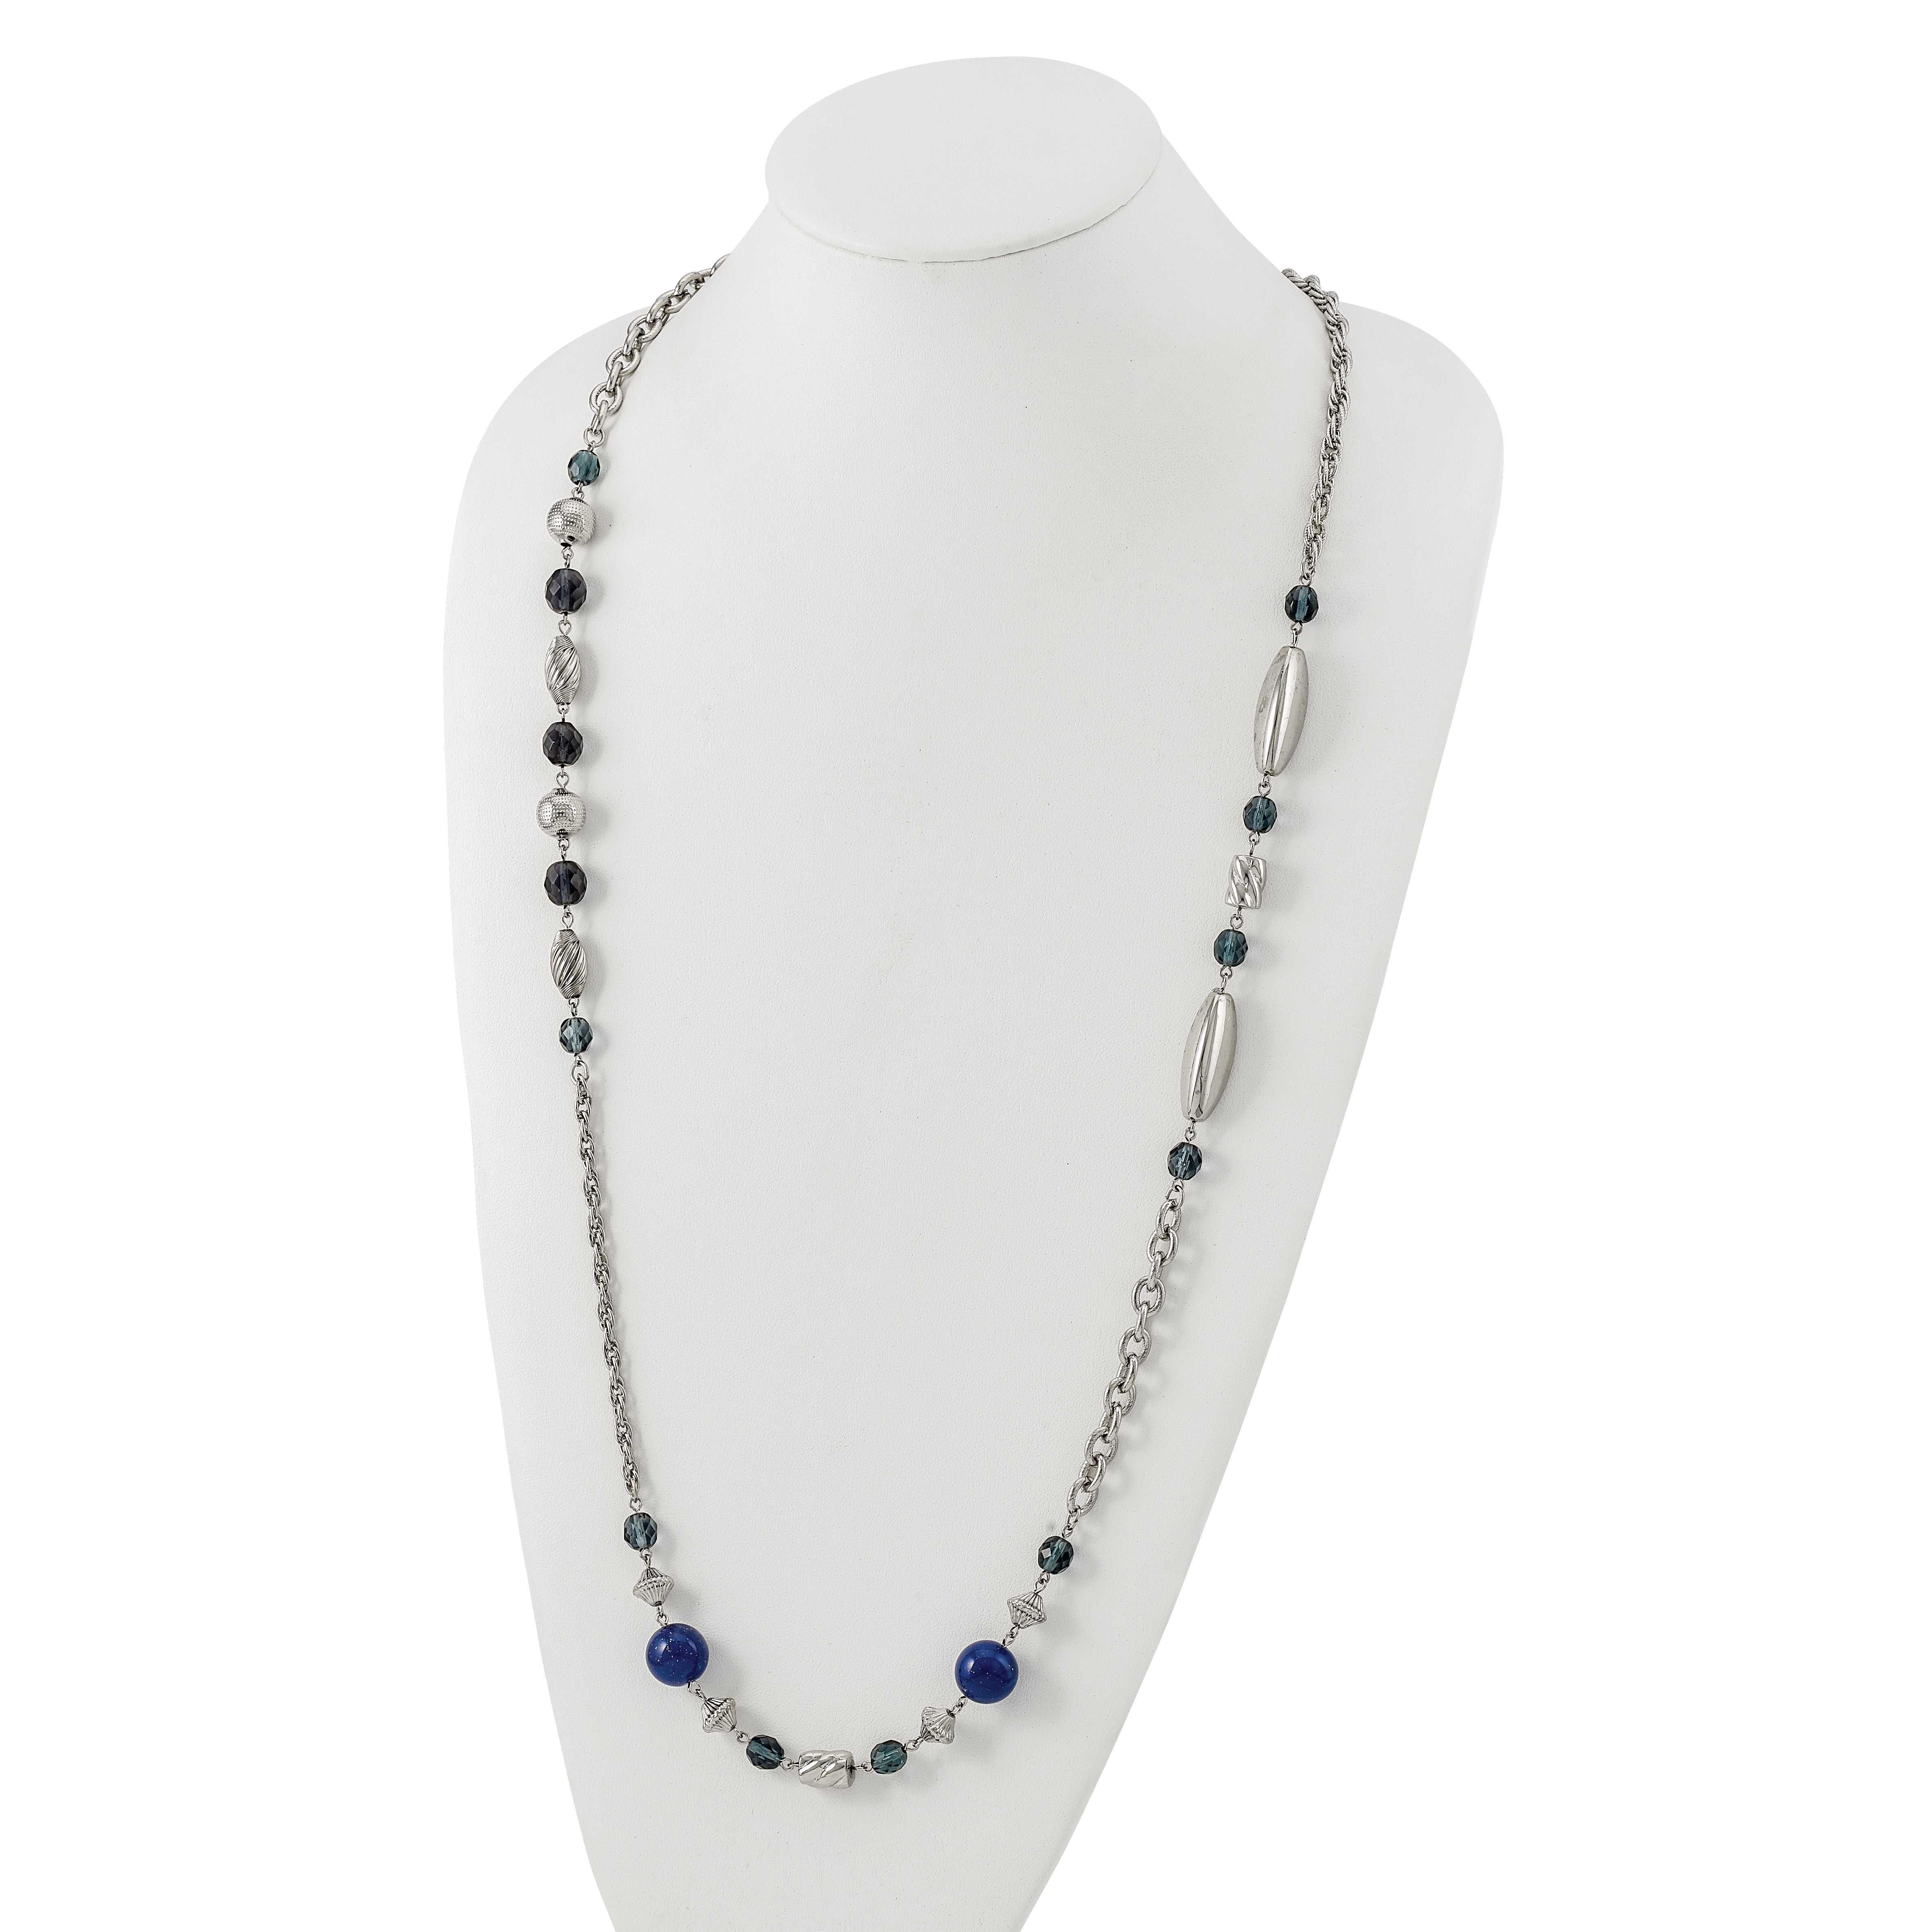 1928 Jewelry Silver-tone Link Textured Beads Blue Beads and Blue Faceted Crystals 44 inch Necklace